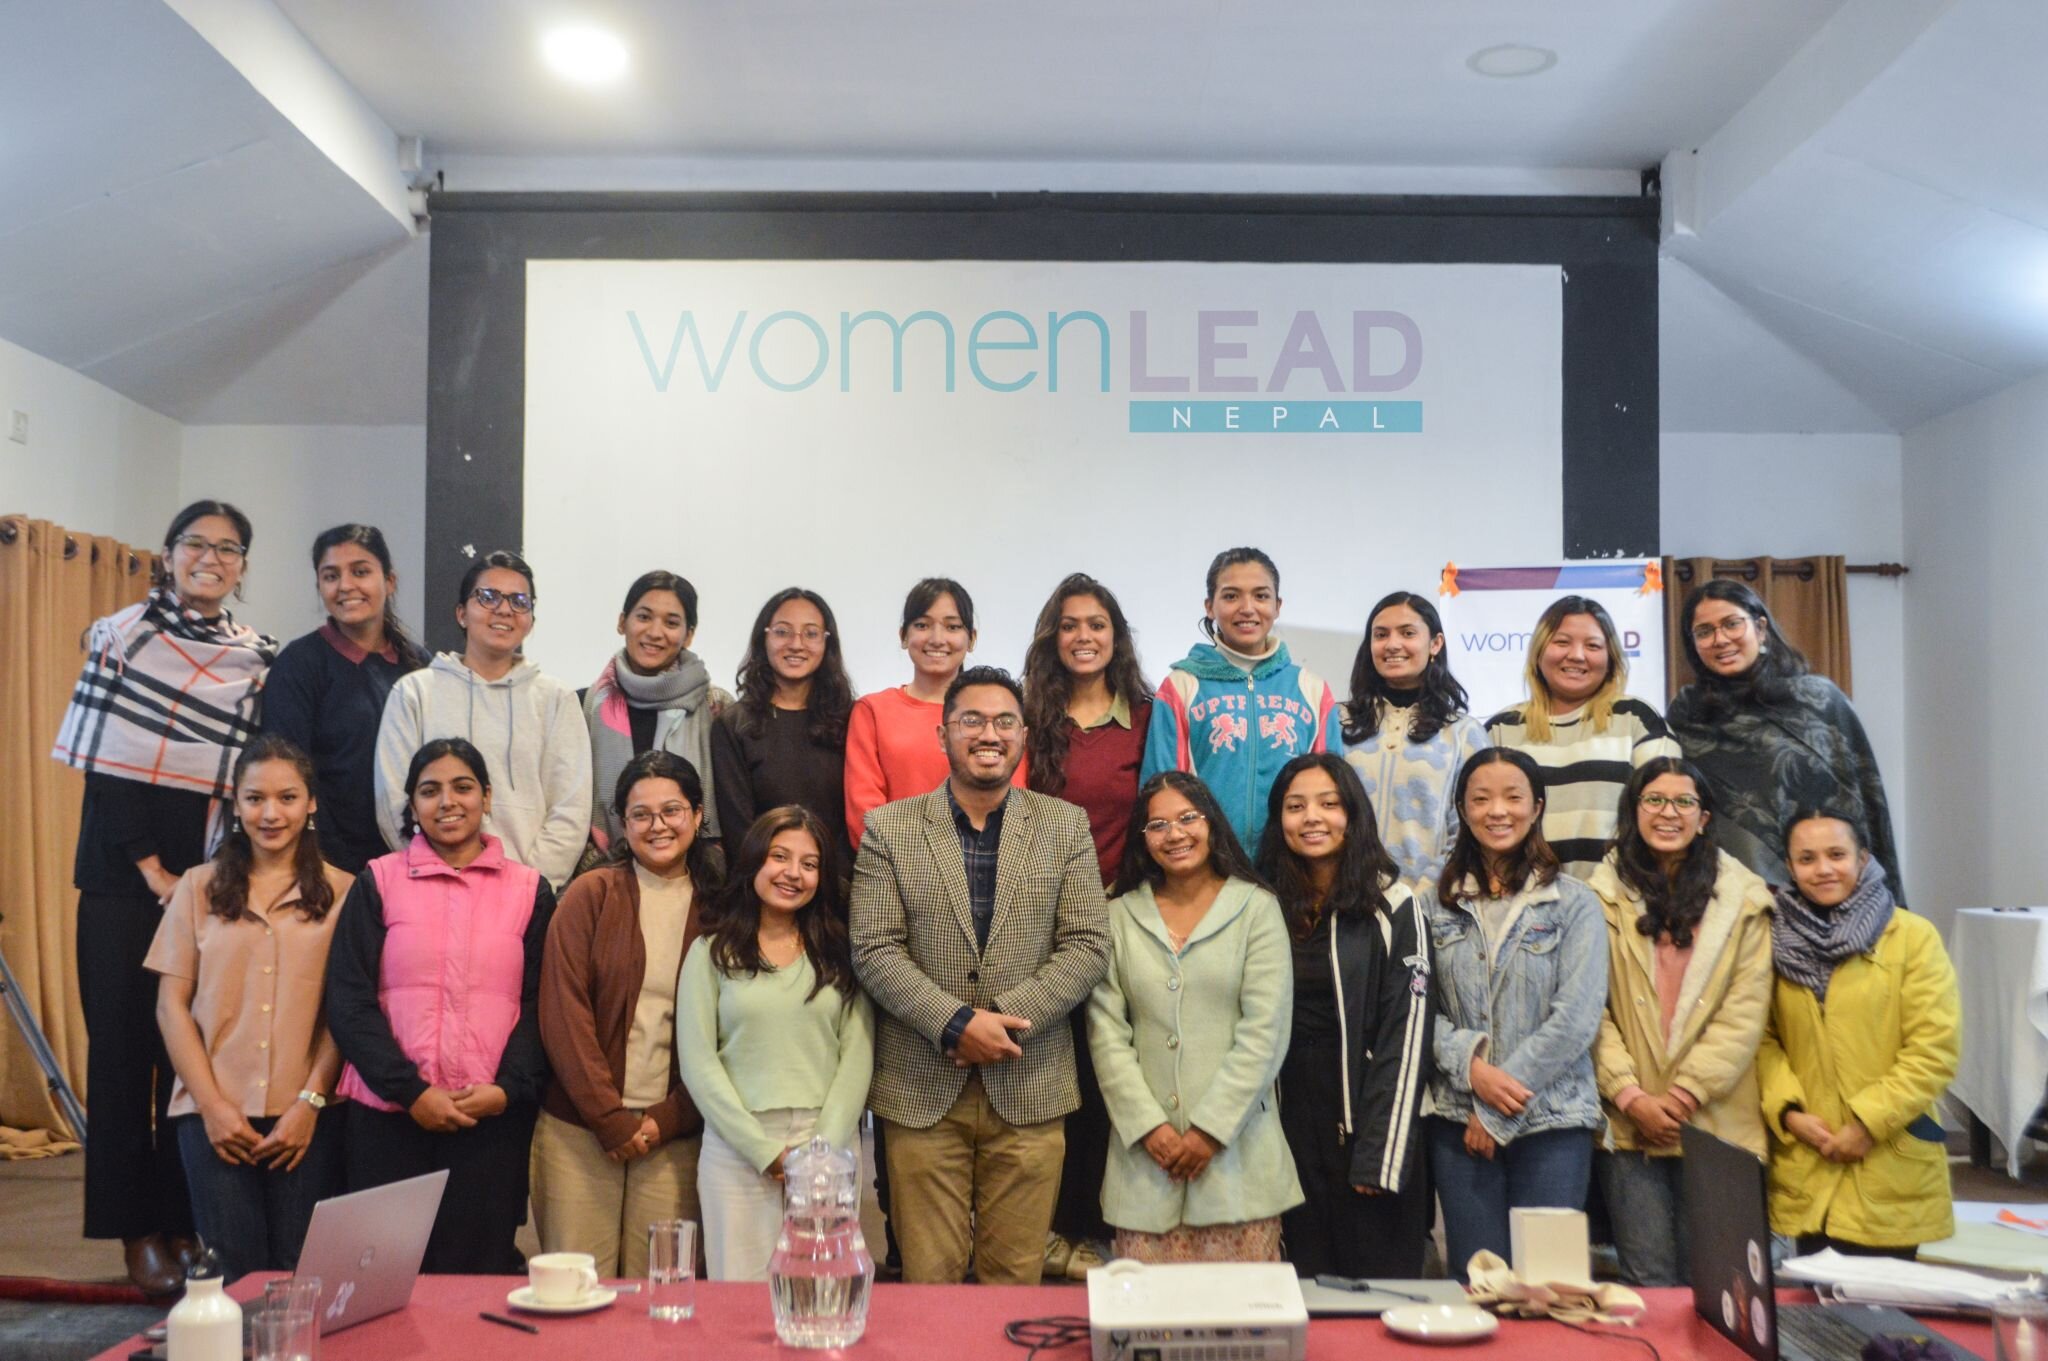 NFA’s Executive Director, Subin Mulmi took an Insightful Session on Gender Dynamics in Constitution, Citizenship, and Statelessness for the Fellows of Women Lead Nepal